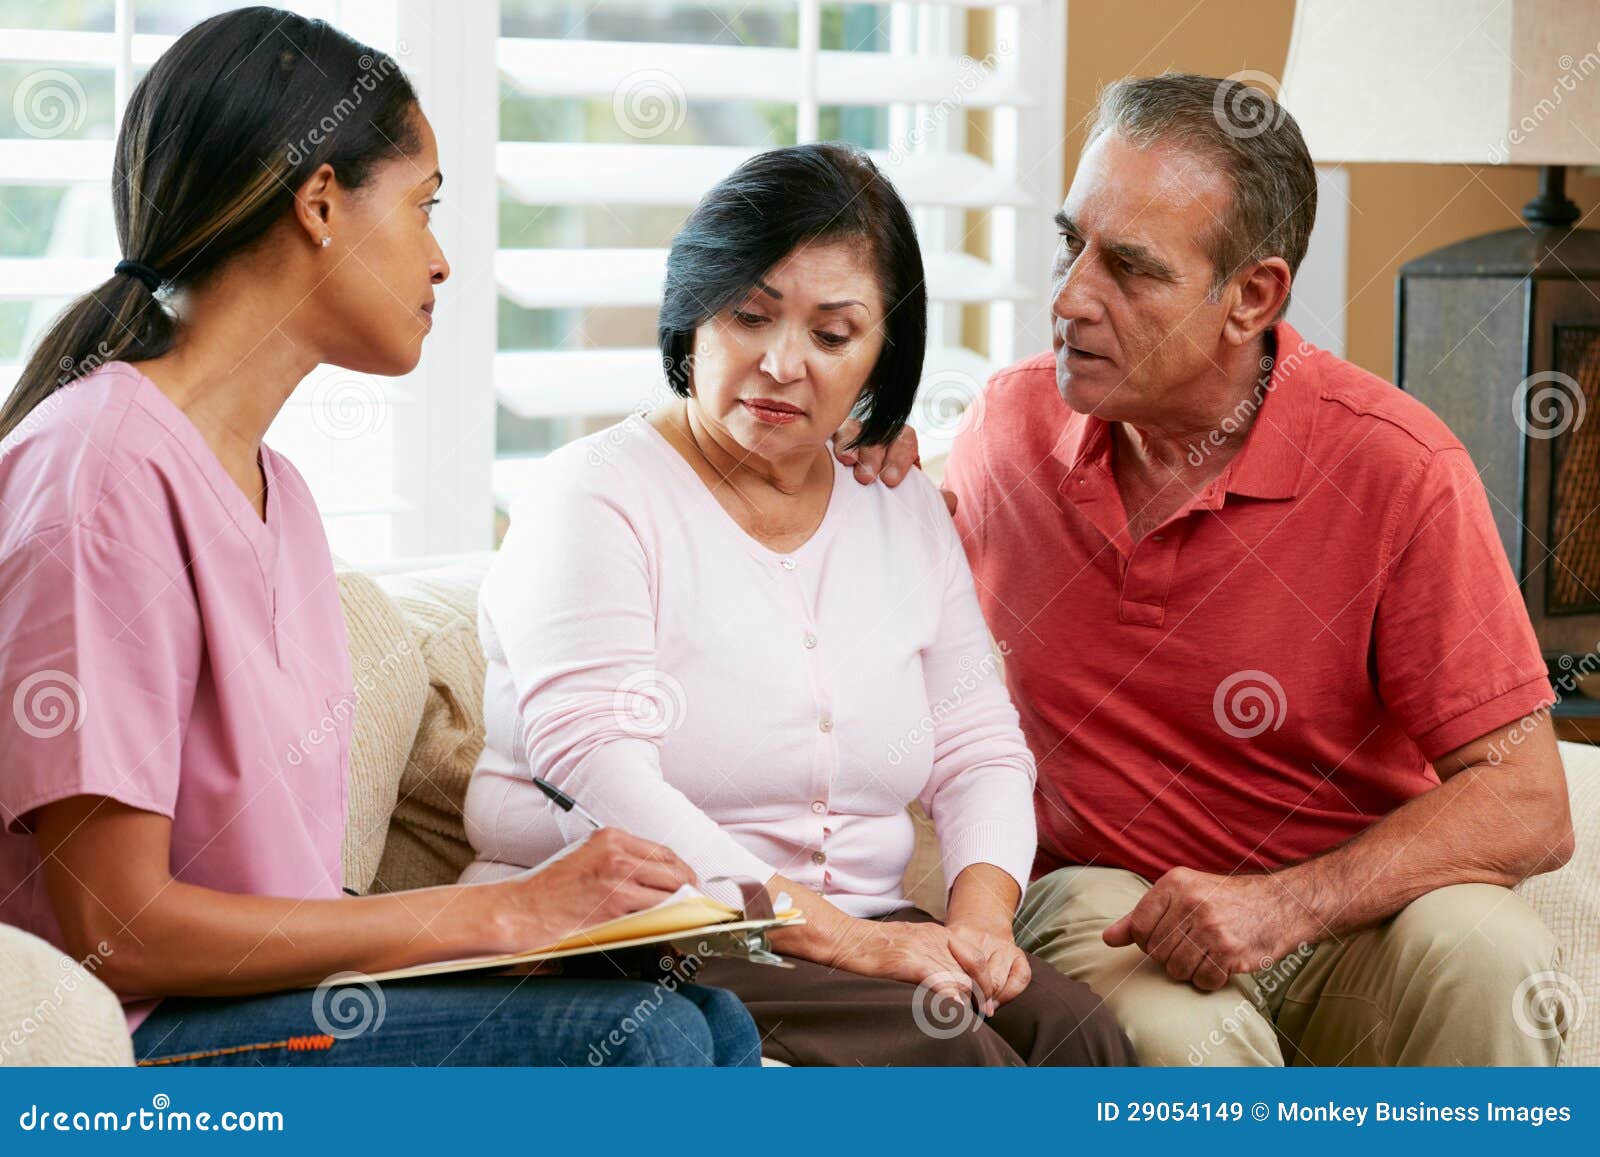 nurse making notes during home visit with senior couple